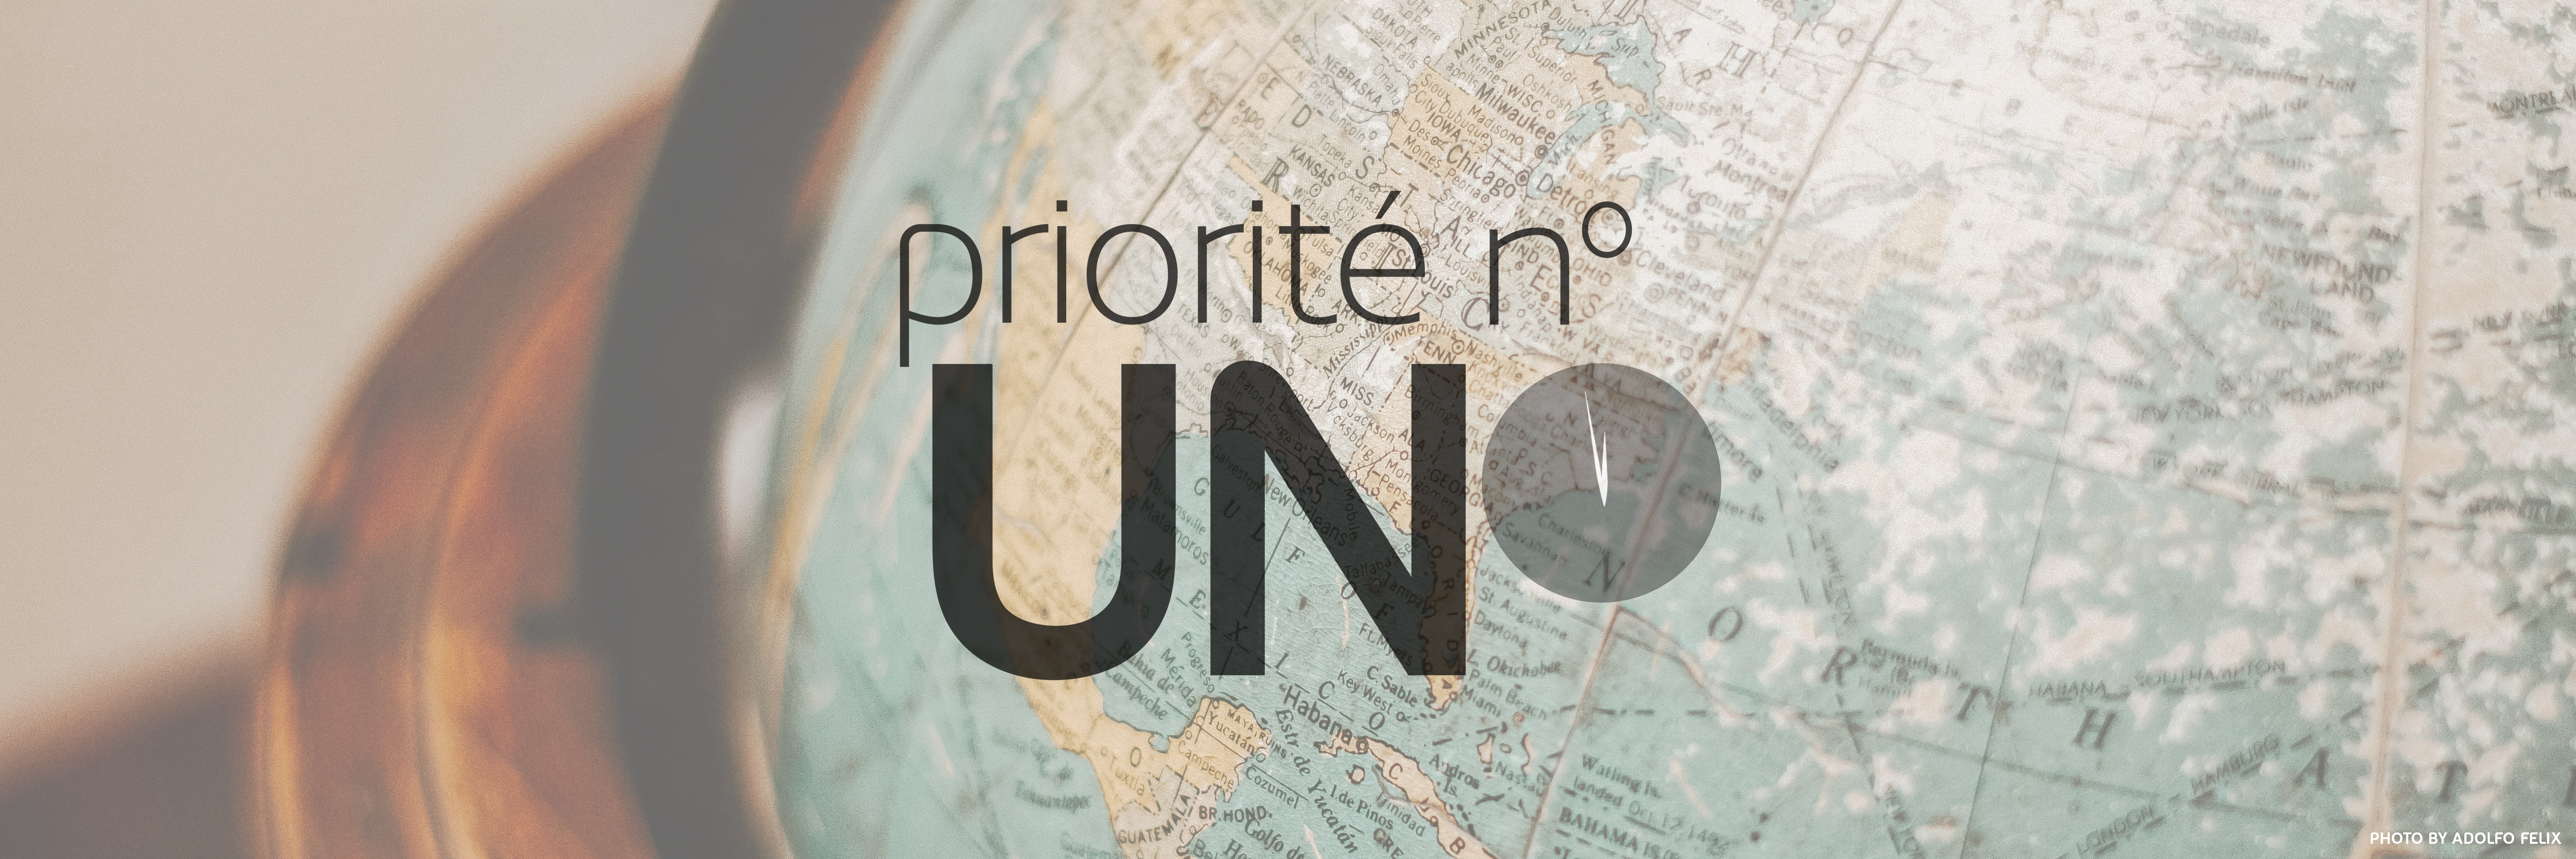 Priority ONE French logo with a world map behind it